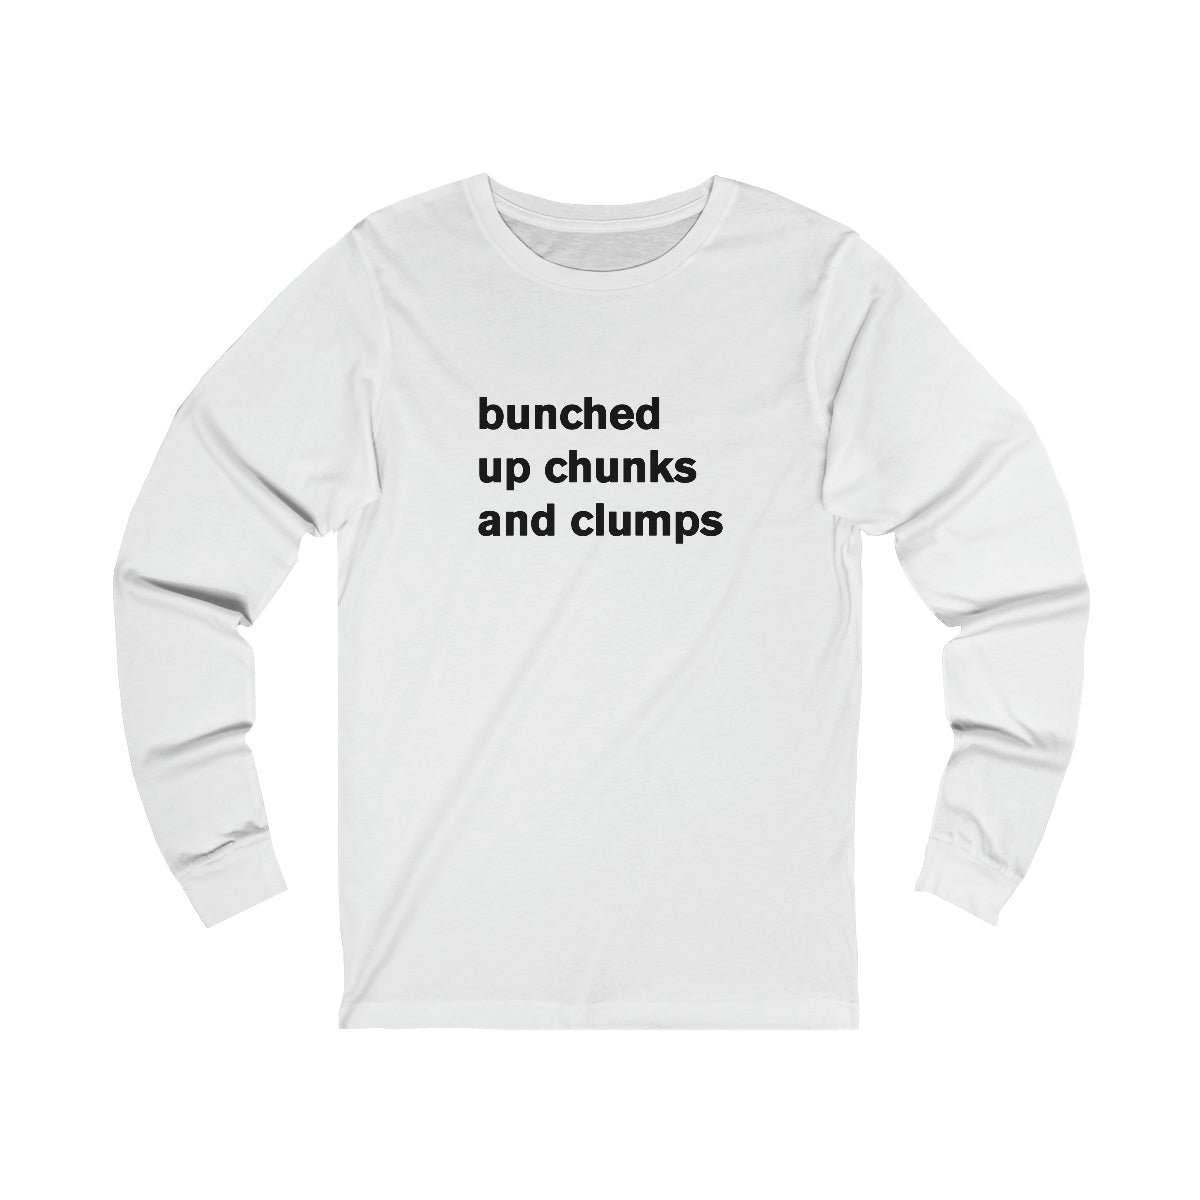 bunched up chunks and clumps - long sleeve